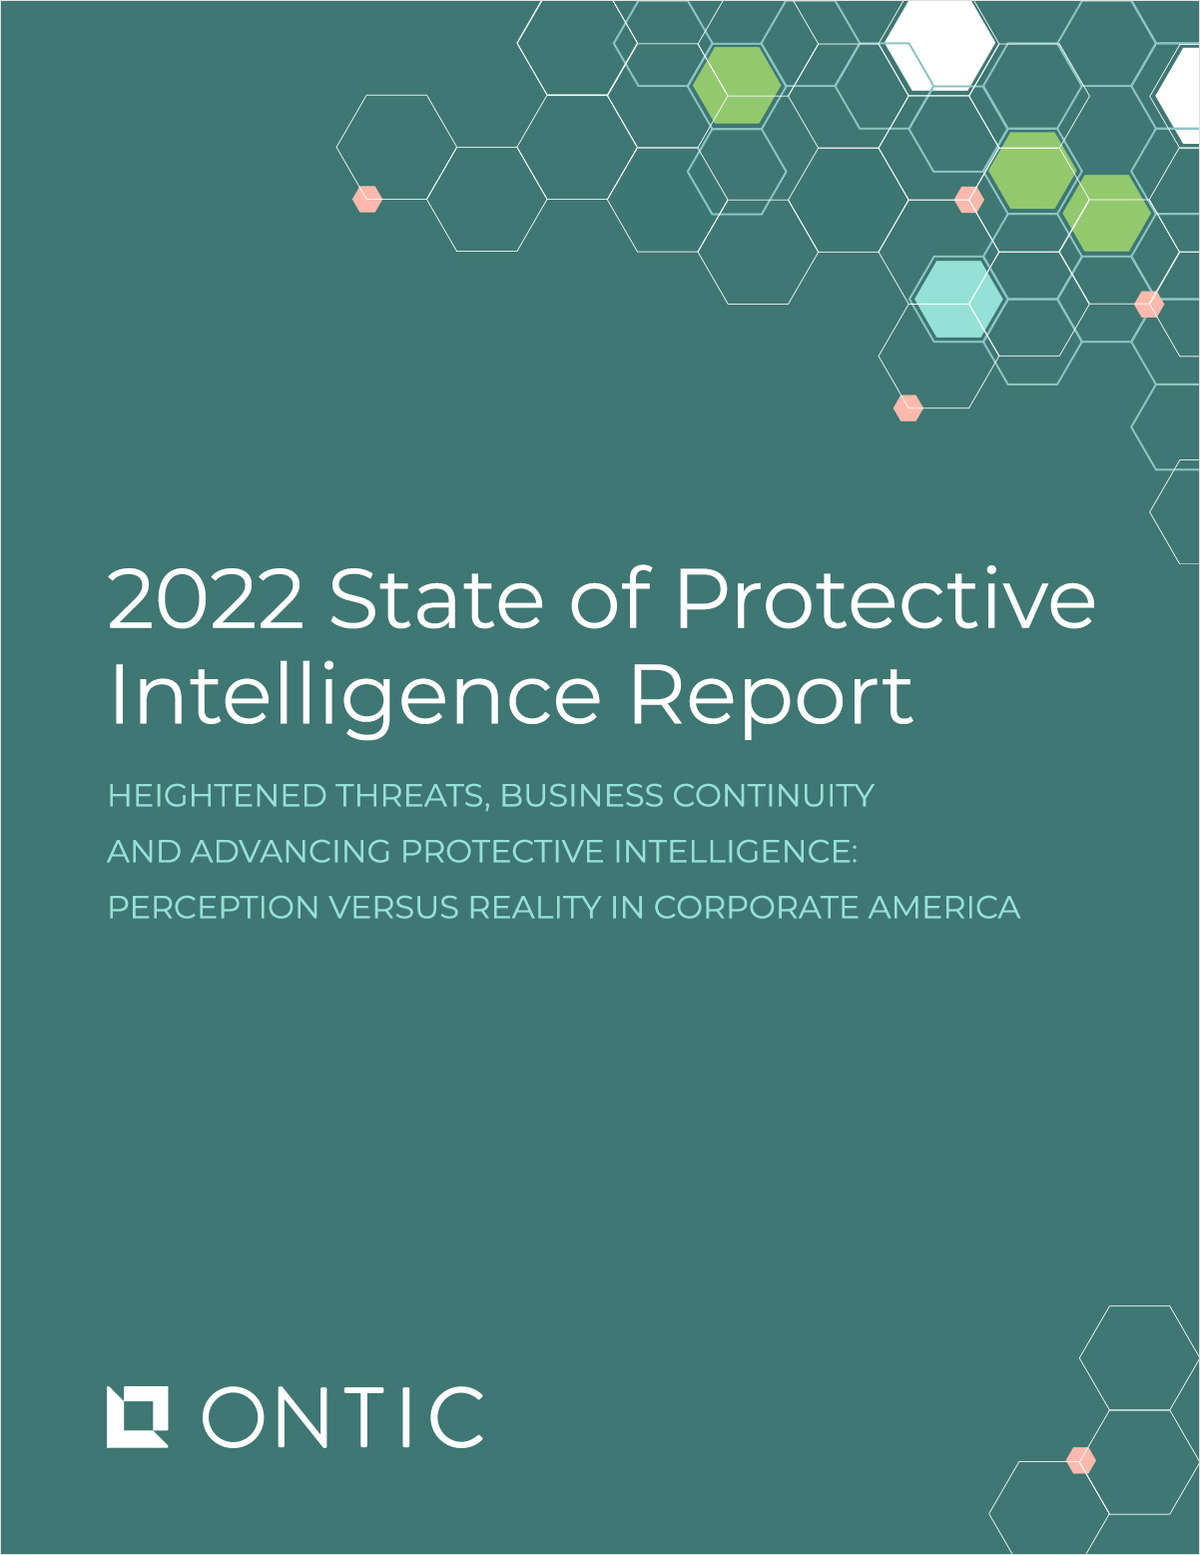 The 2022 State of Protective Intelligence Report